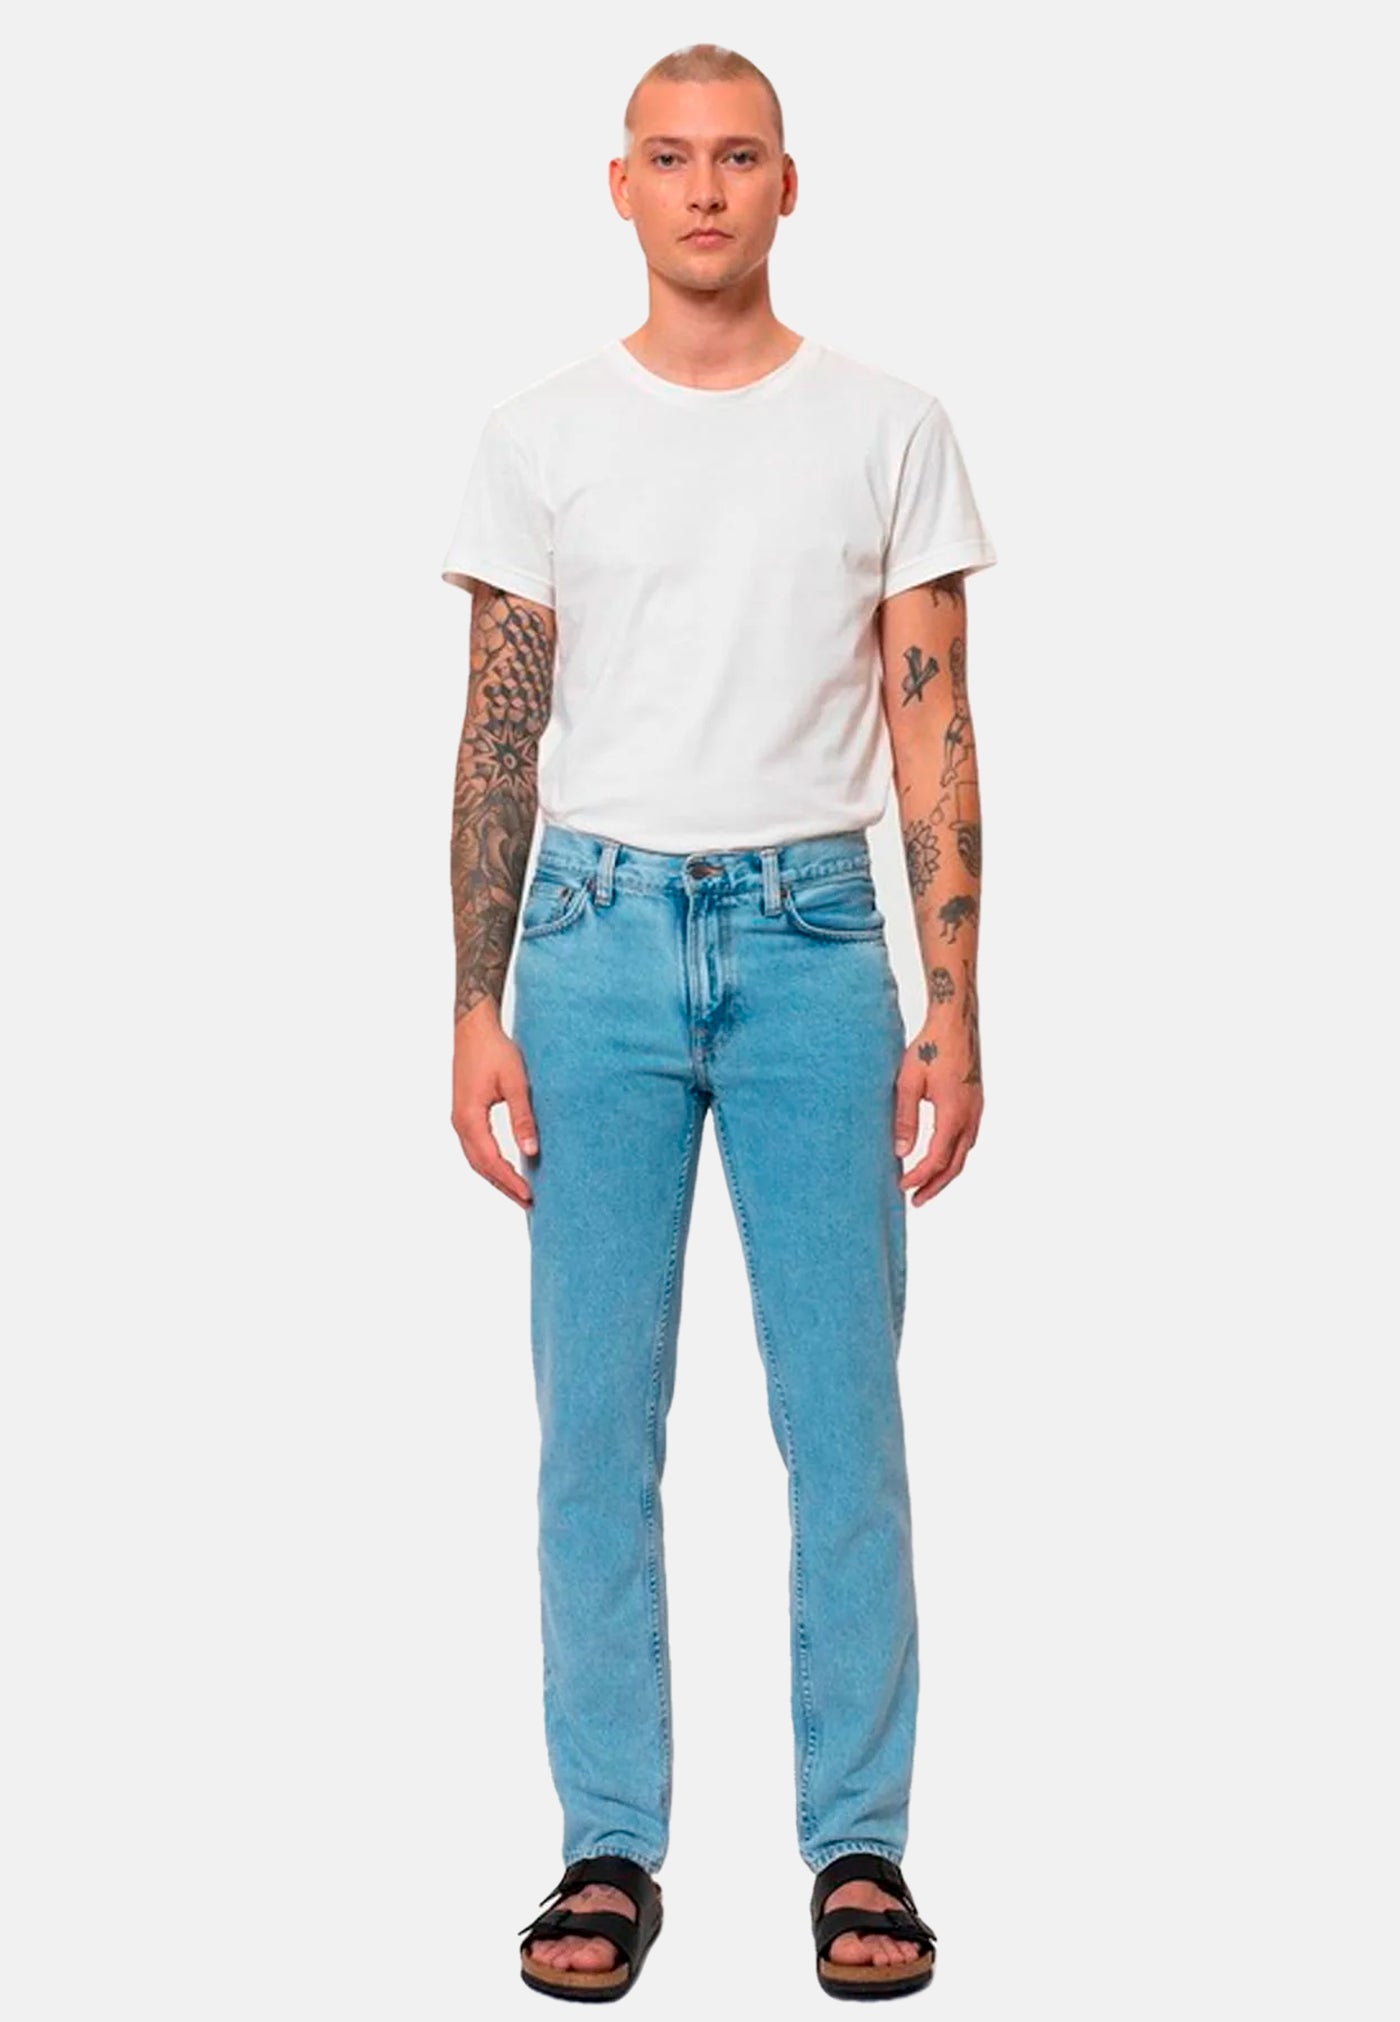 Gritty Jackson - Nudie Jeans